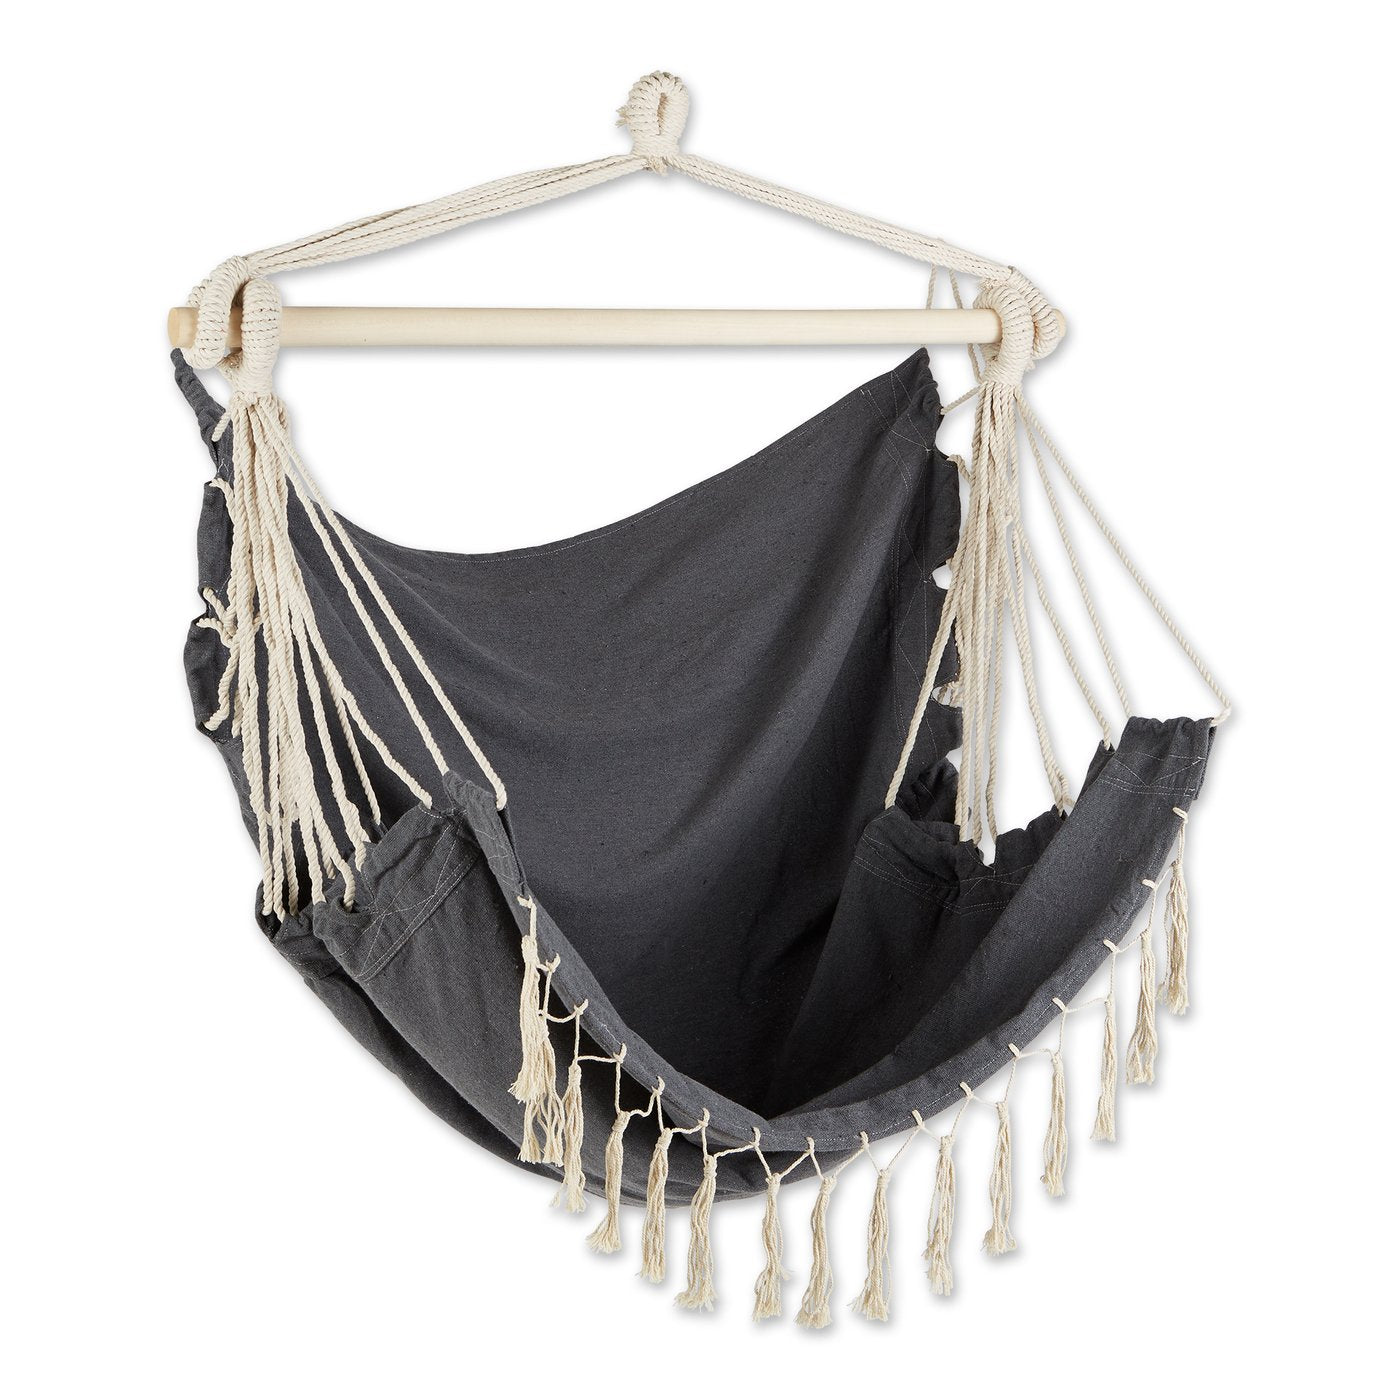 Hammock Chair with Tassel Fringe - Gray Accent Plus